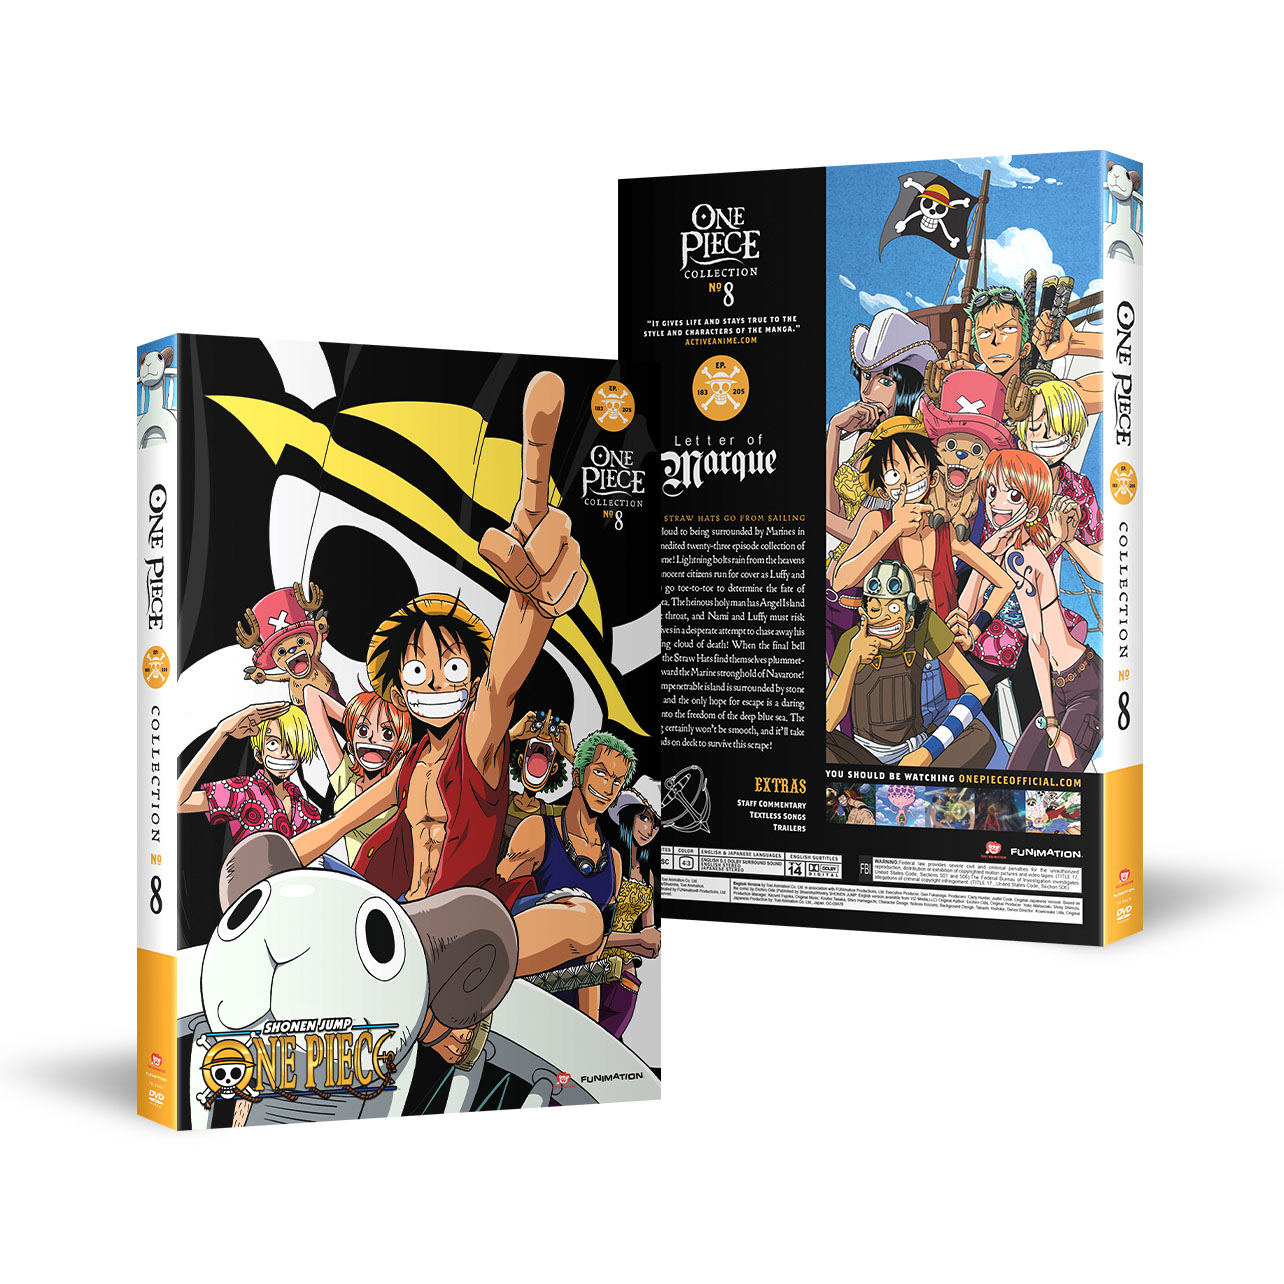 One Piece - Collection 8 - DVD image count 0